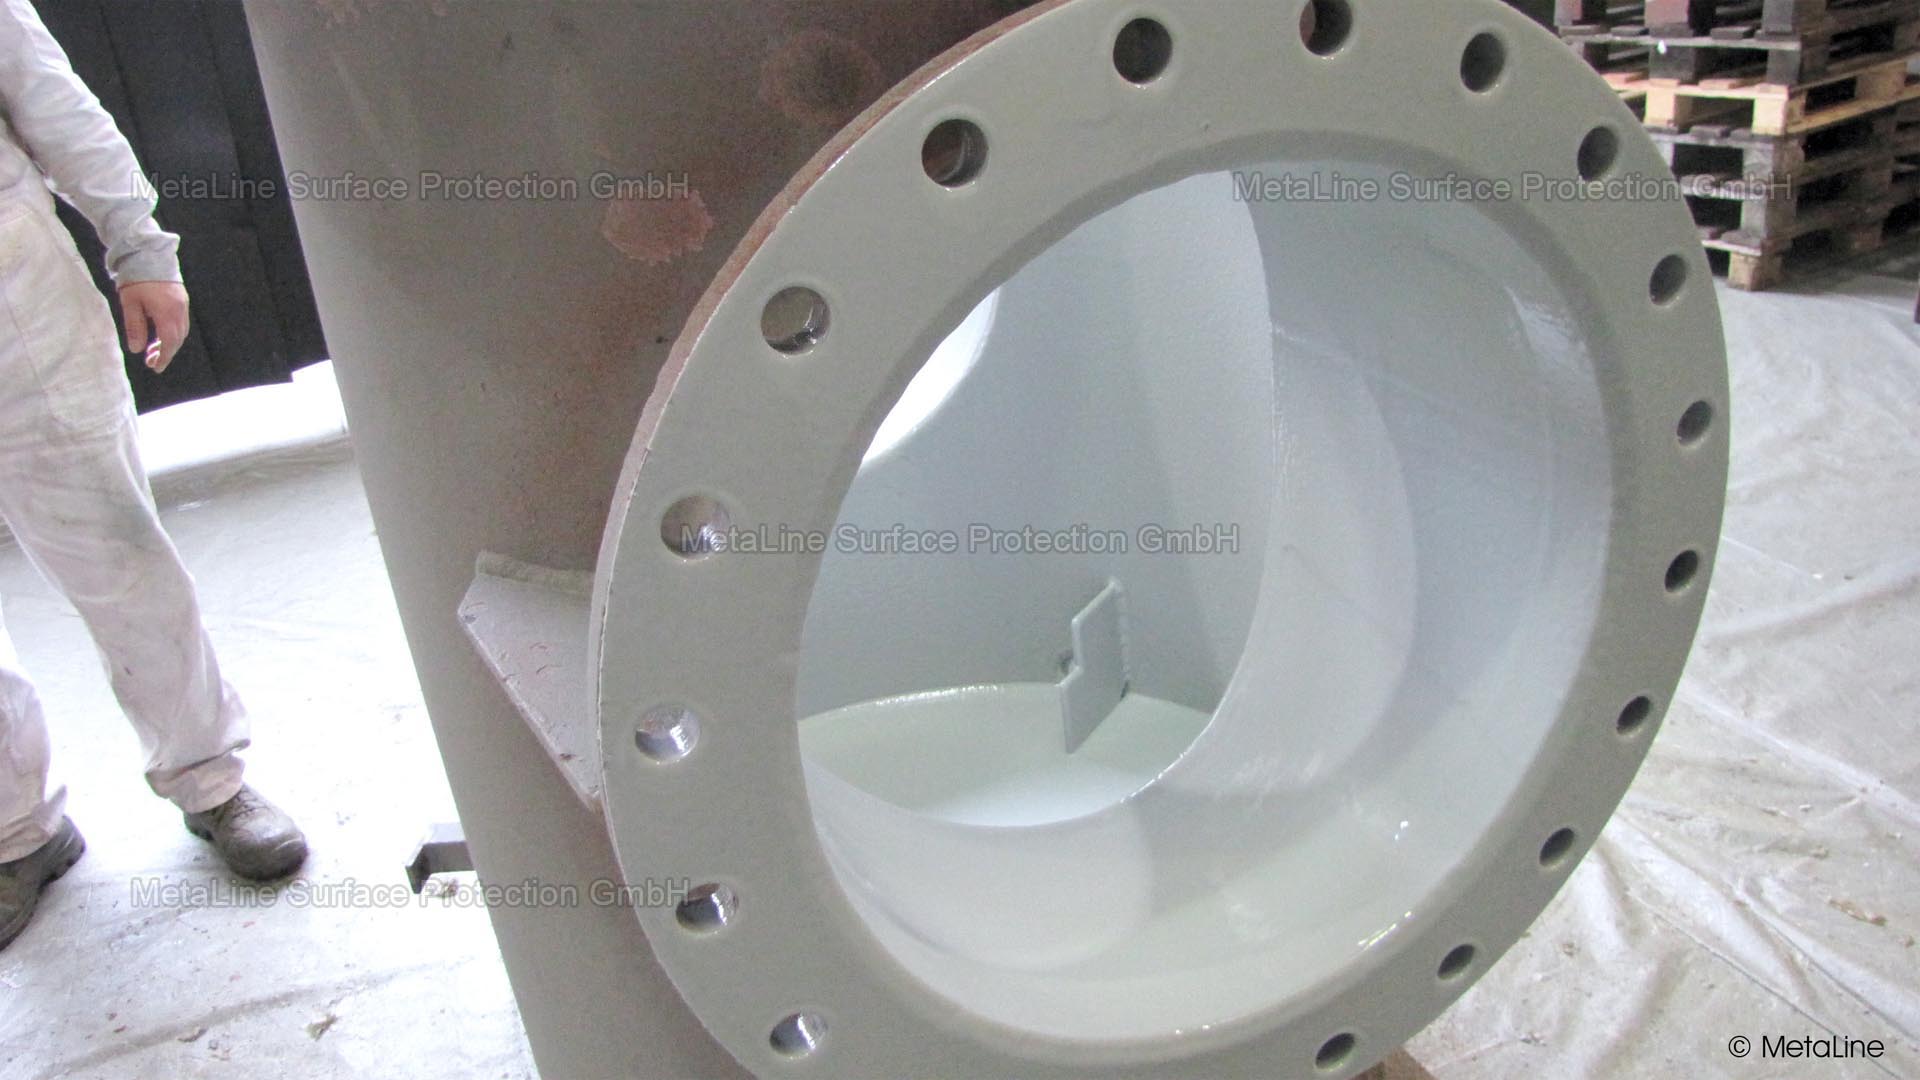 <!-- START: ConditionalContent --><!-- END: ConditionalContent -->   <!-- START: ConditionalContent --> Filter box; Strainer; Seachest; Corrosion; Rubber coating; Coating; Wear; Repair; Sea water, salt water <!-- END: ConditionalContent -->   <!-- START: ConditionalContent --><!-- END: ConditionalContent -->   <!-- START: ConditionalContent --><!-- END: ConditionalContent -->